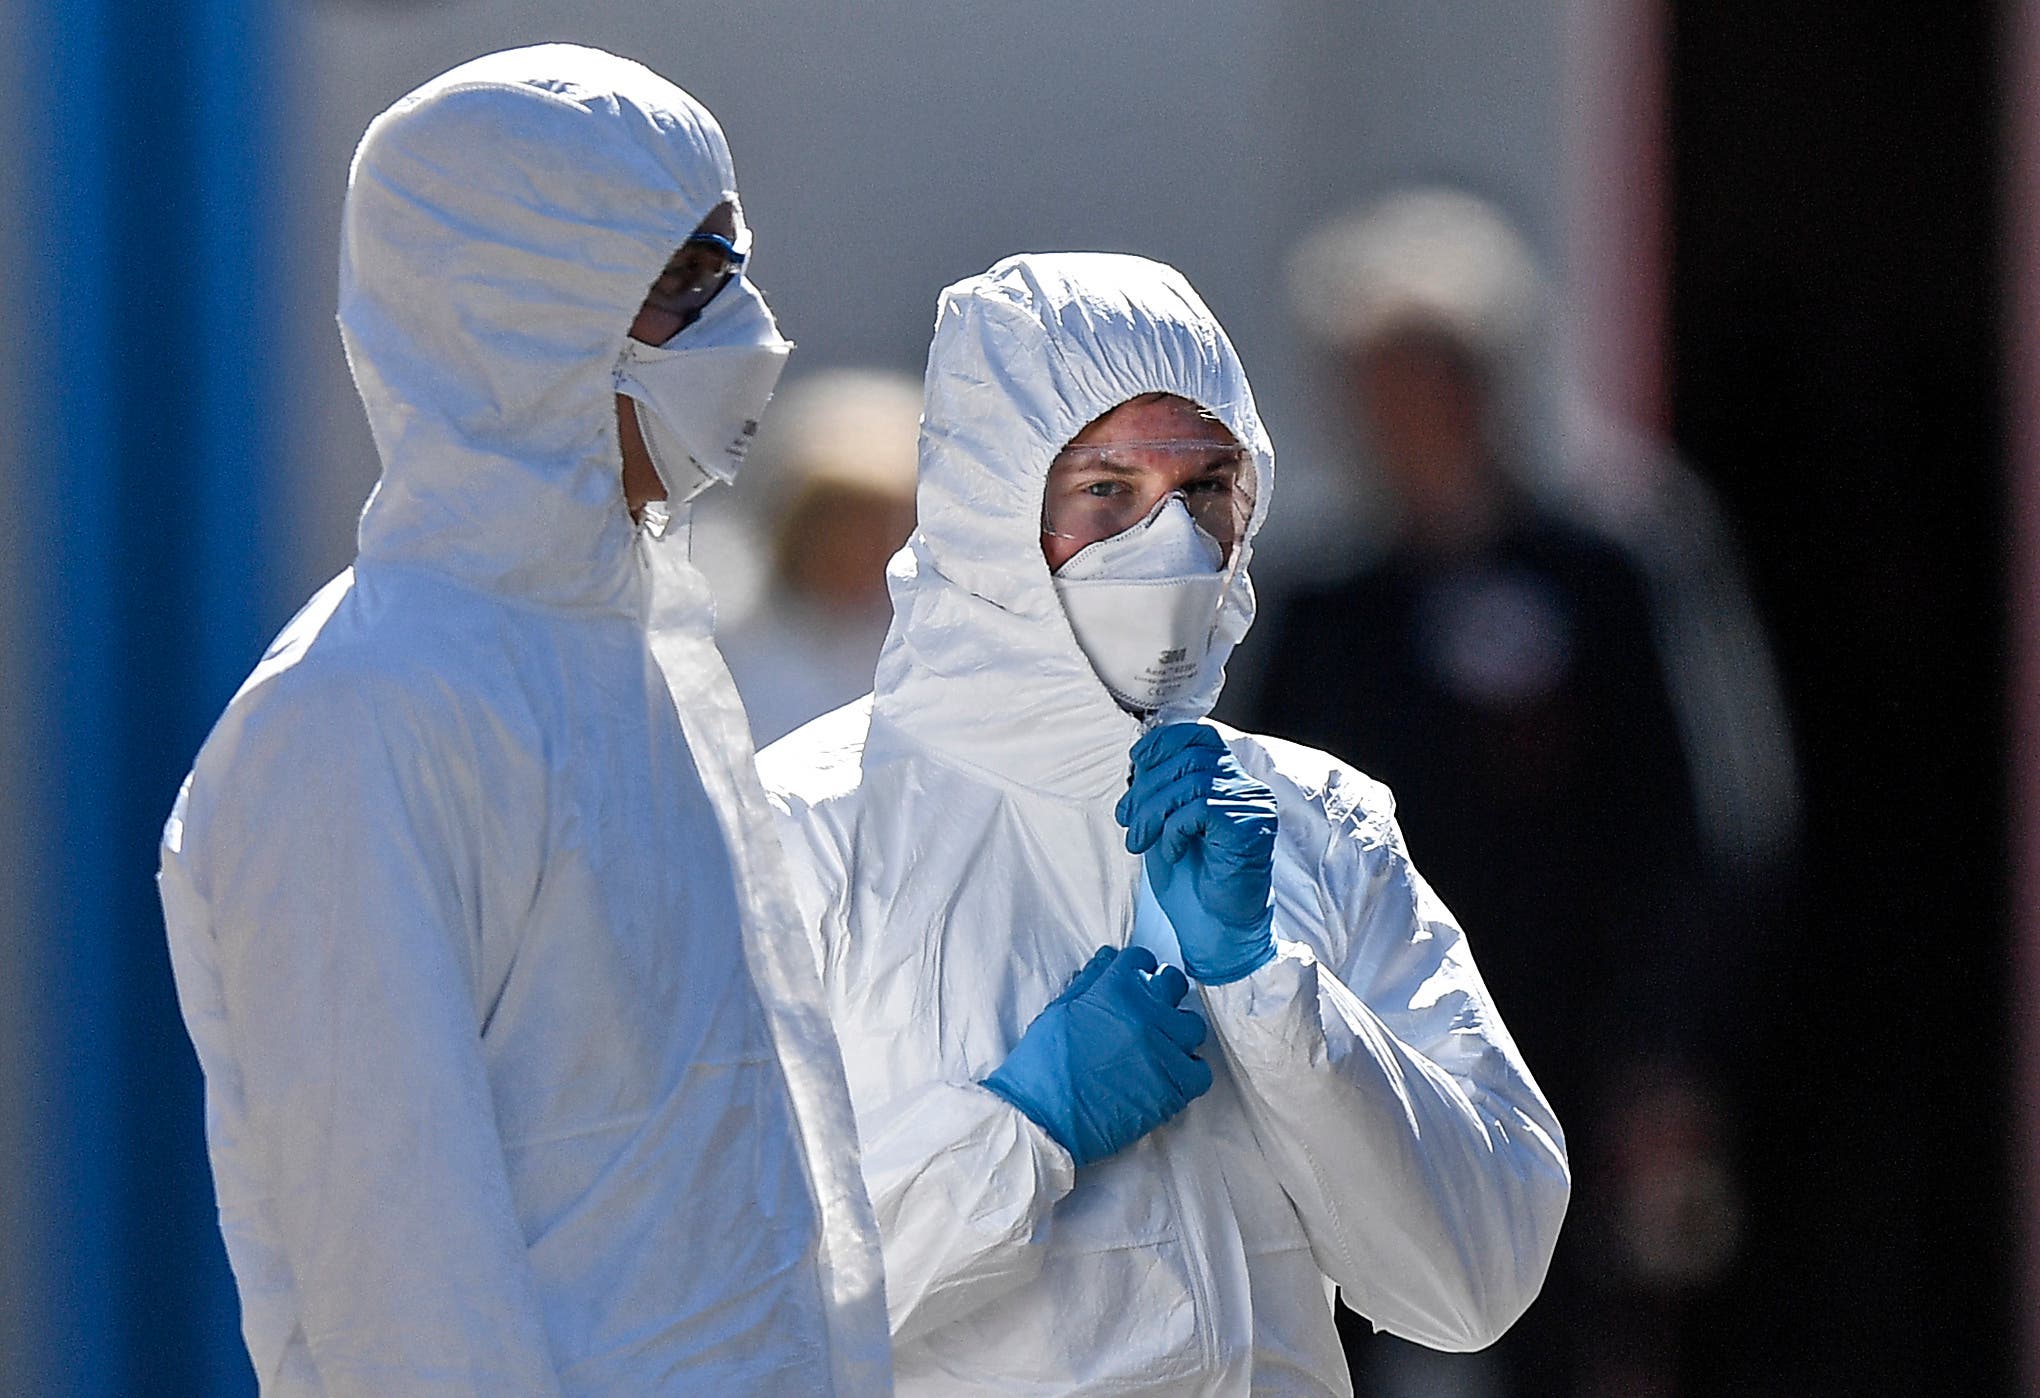 Employees wearing protective clothings wait in the warm sun for the next patient at a coronavirus test station outside the hospital 'Klinikum Nord' in Dortmund, Germany on April 4, 2020. (AP)